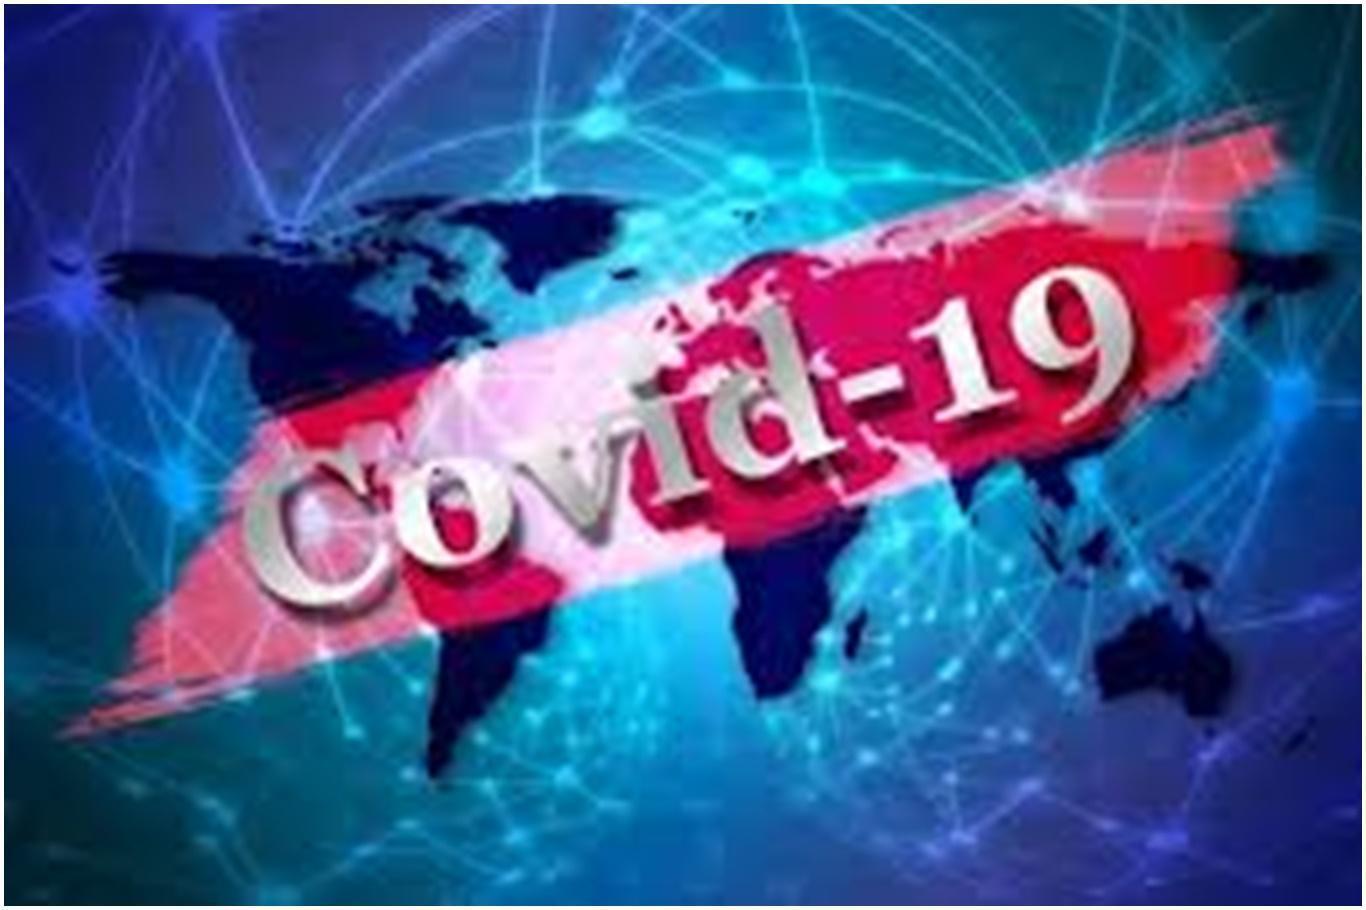 Coronavirus worldwide: The number of confirmed cases rises to 21,072,125